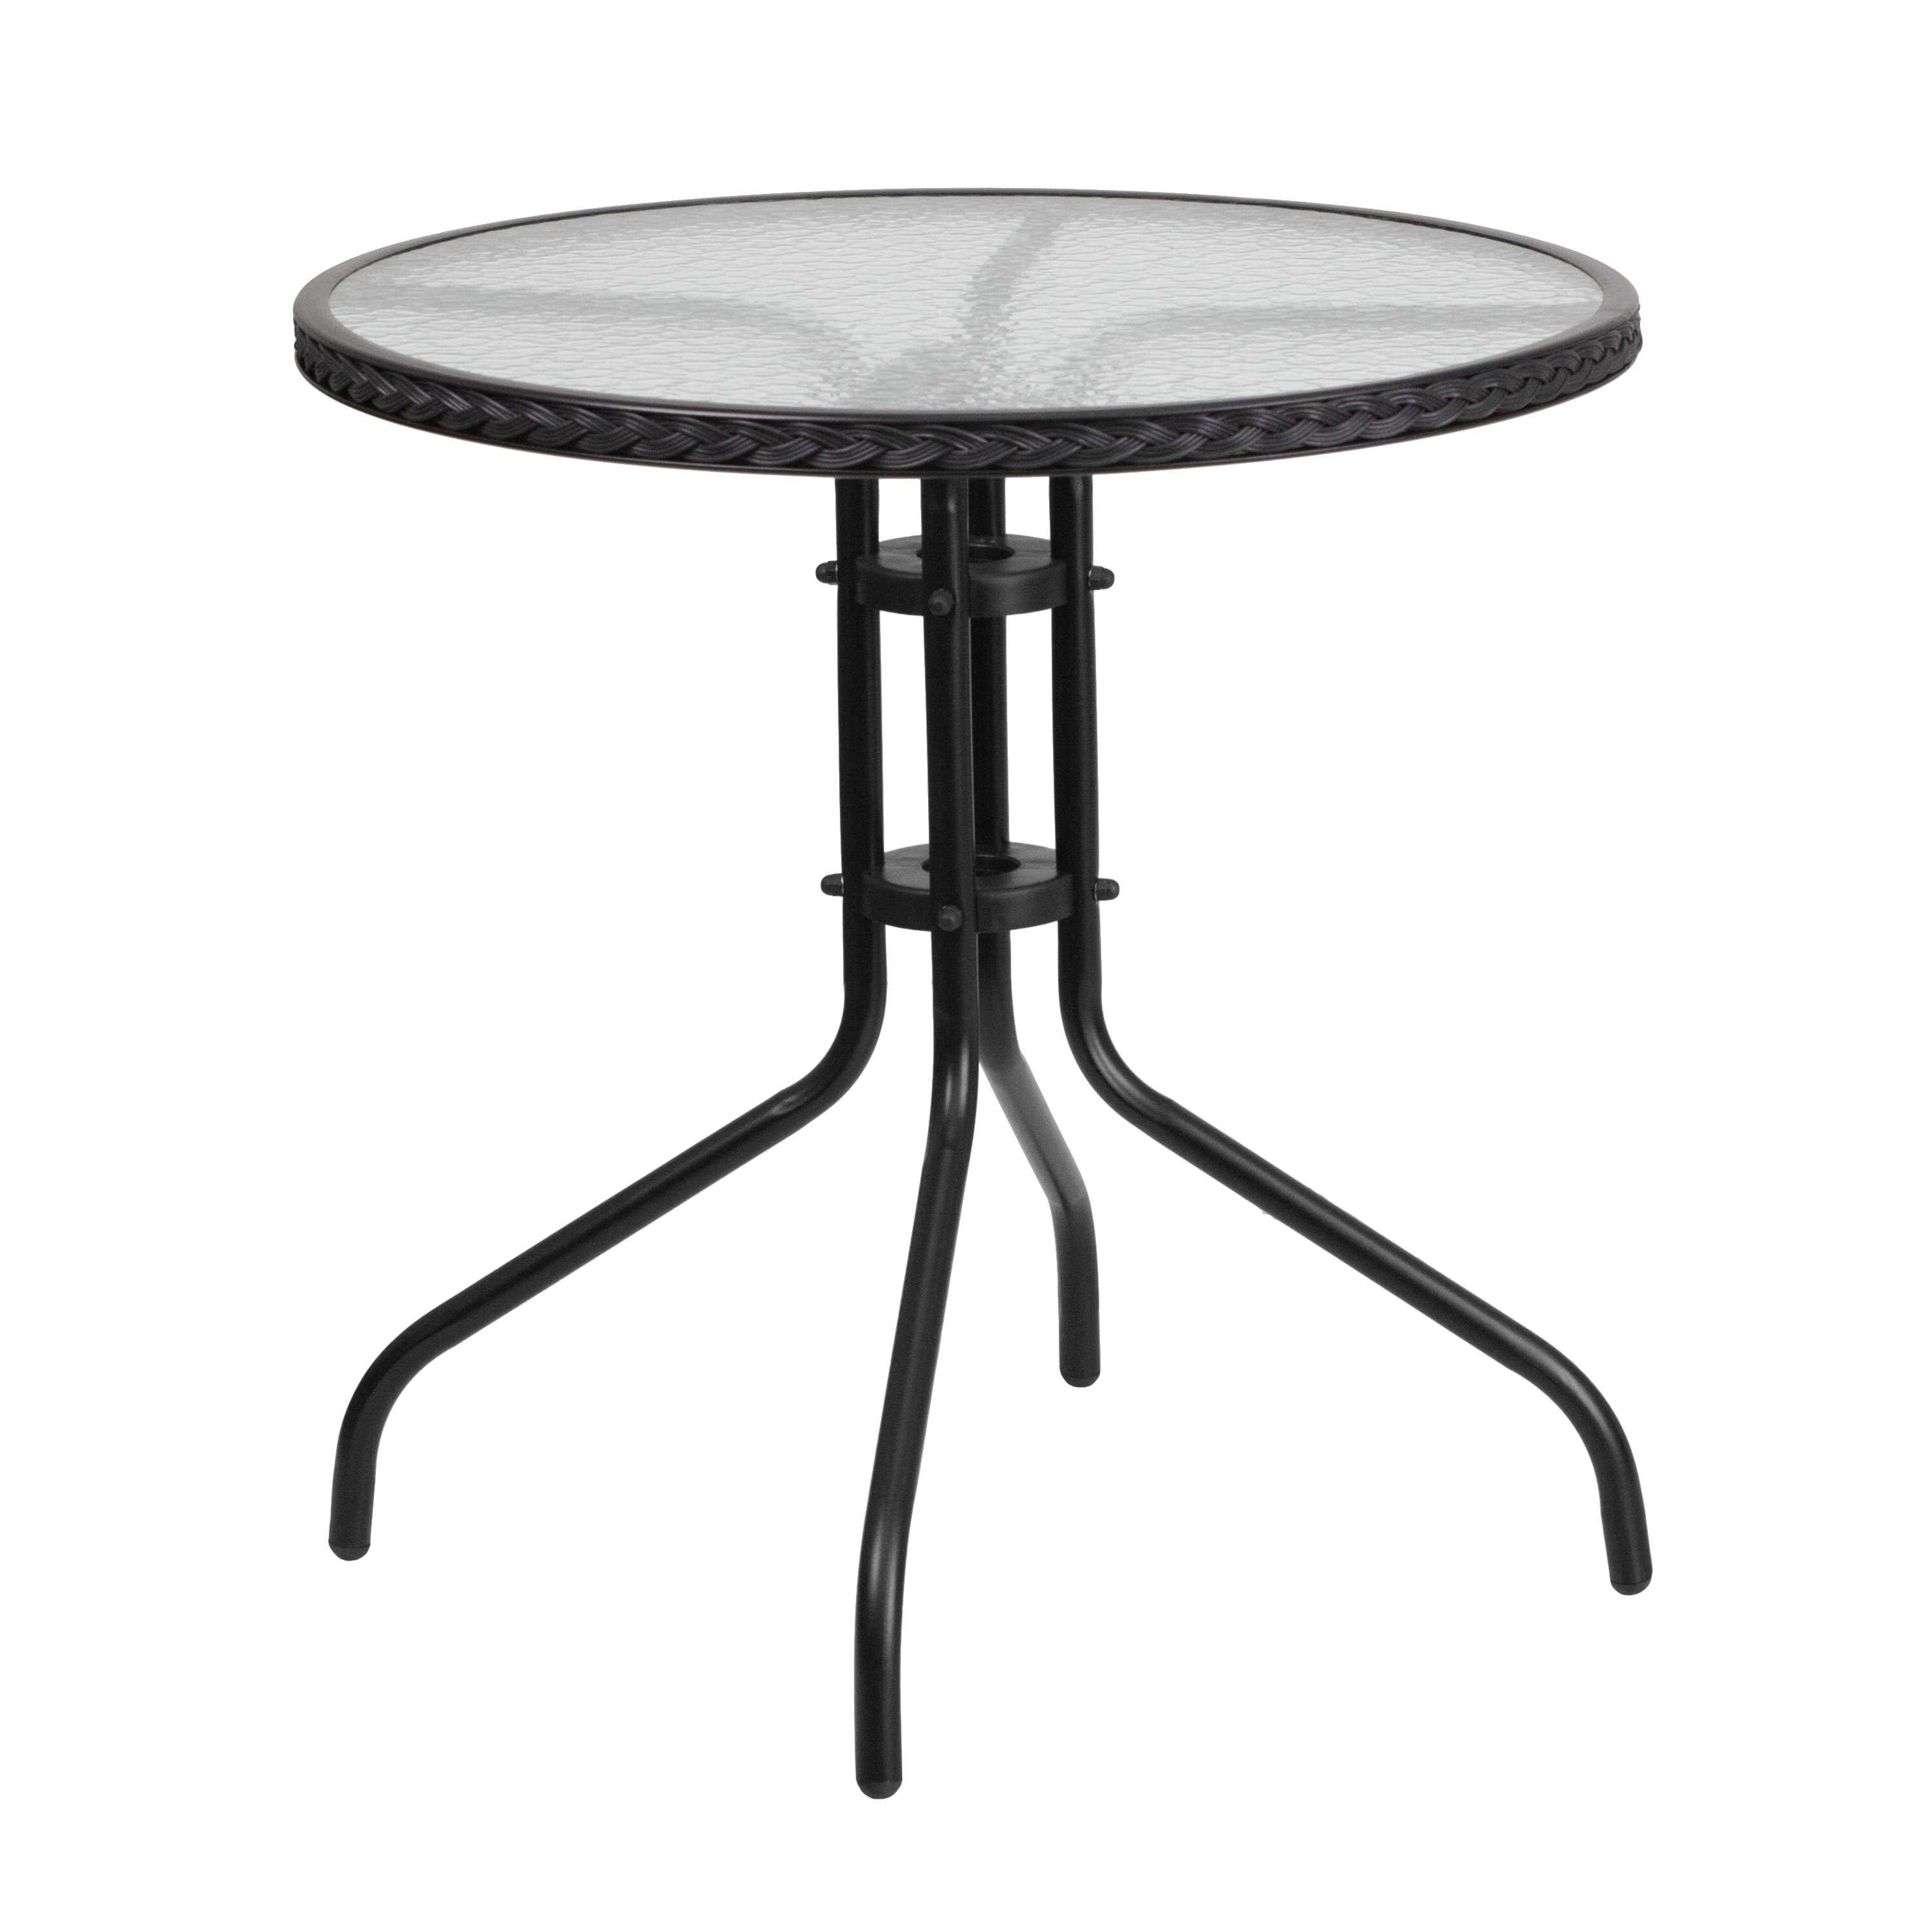 Flash Furniture TLH-087-BK-GG 28'' Round Tempered Glass Top Patio Table with Black Rattan Edging